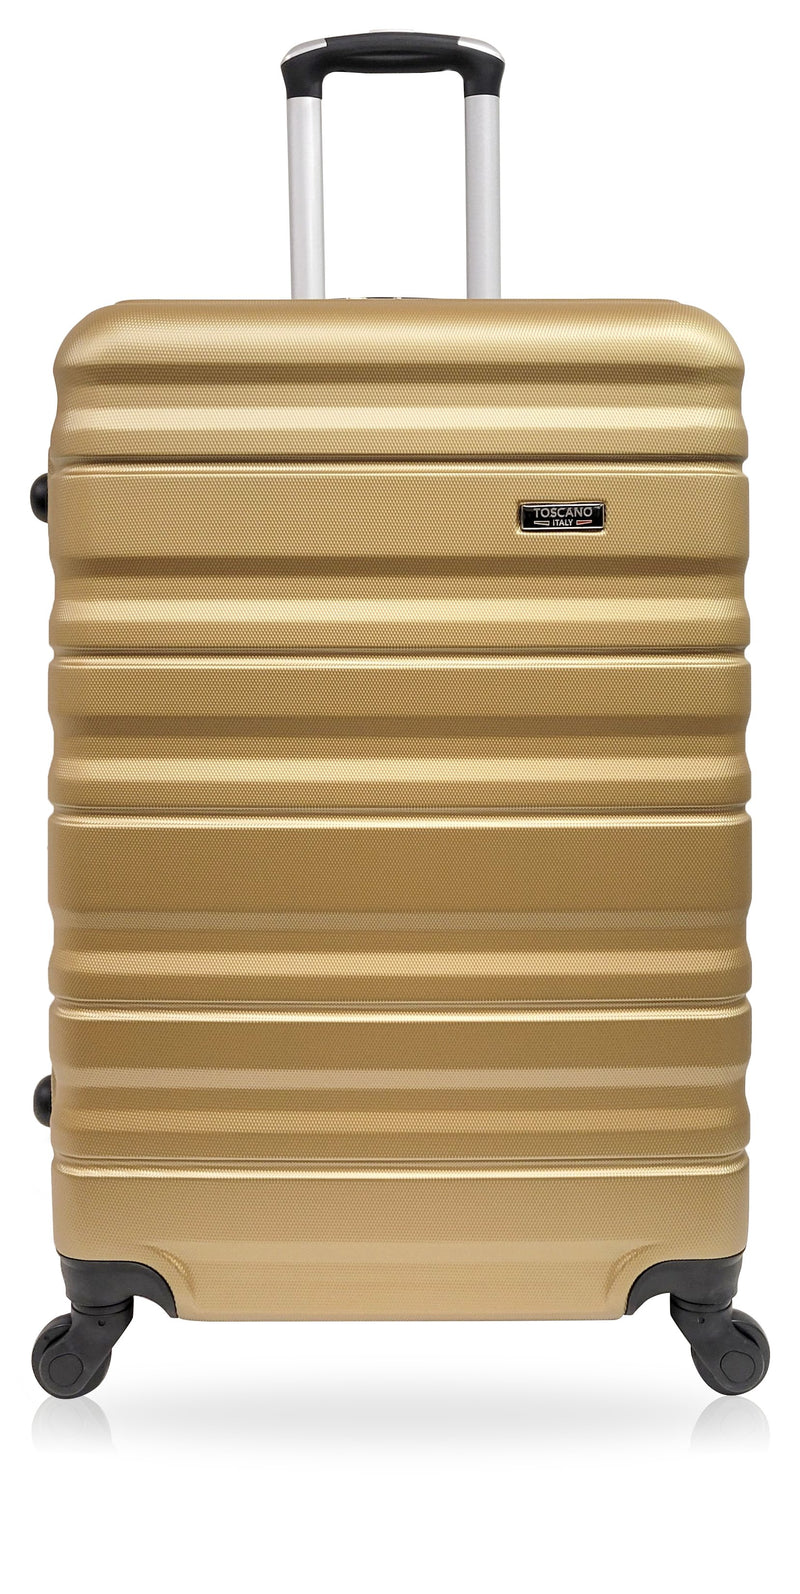 TOSCANO by Tucci 22-inch Barre Hardside Lightweight Luggage Suitcase